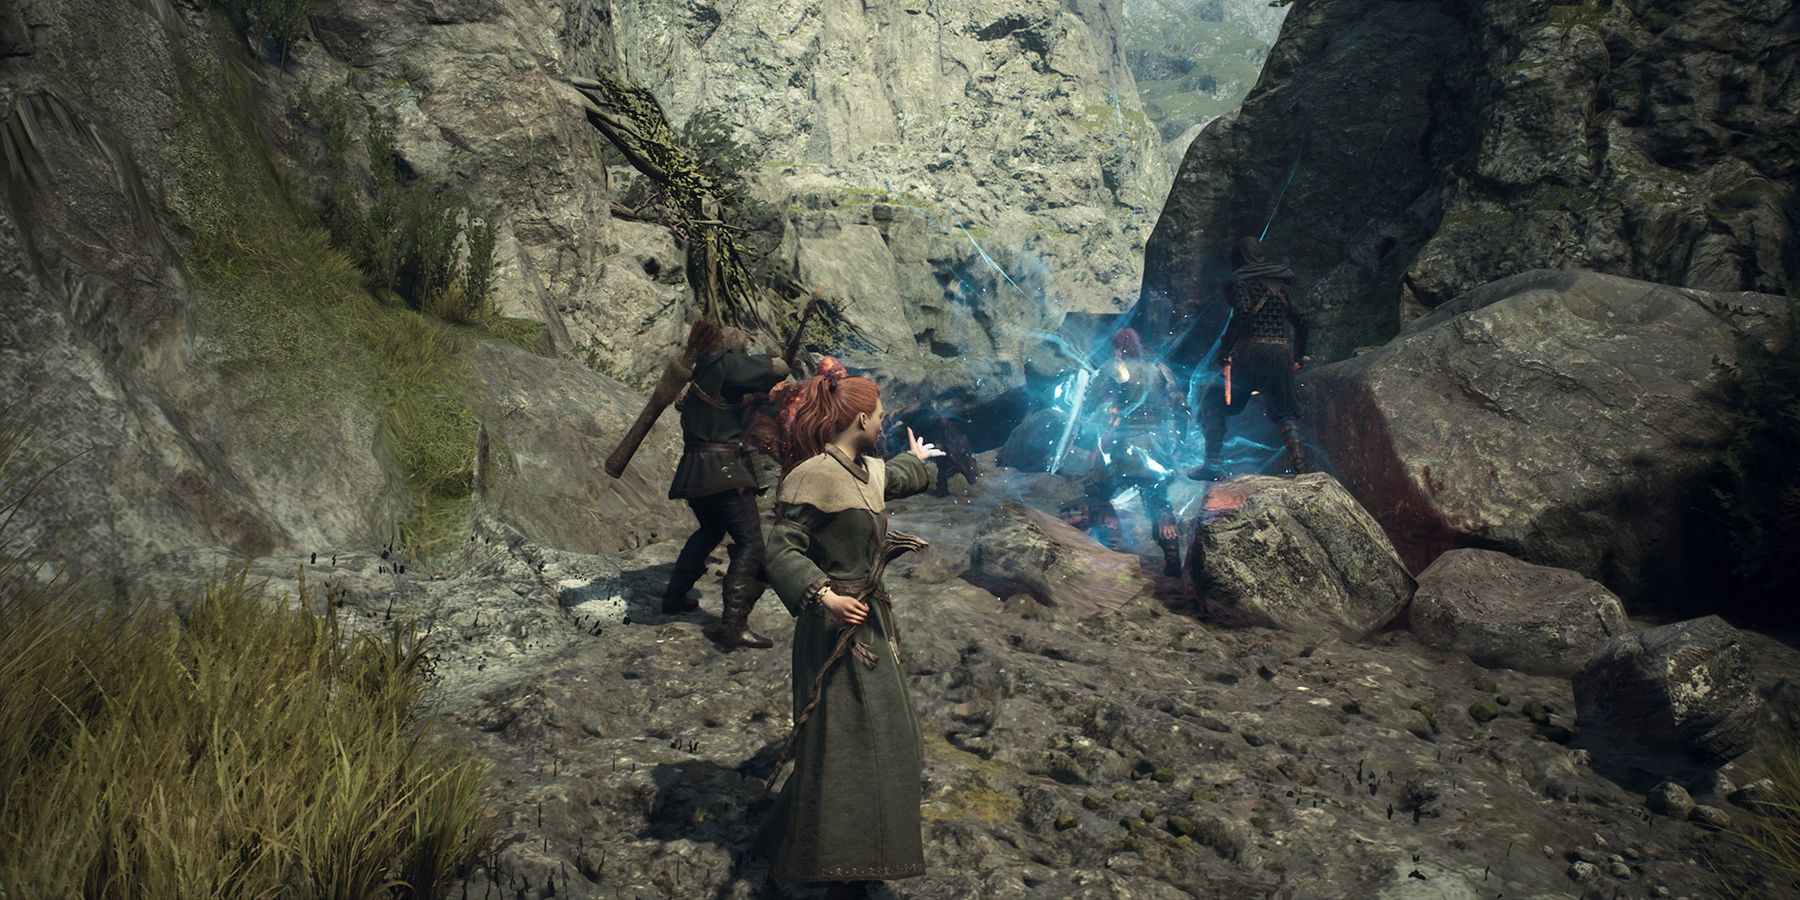 Dragon's Dogma 2 Mage casting a spell on a group of enemies